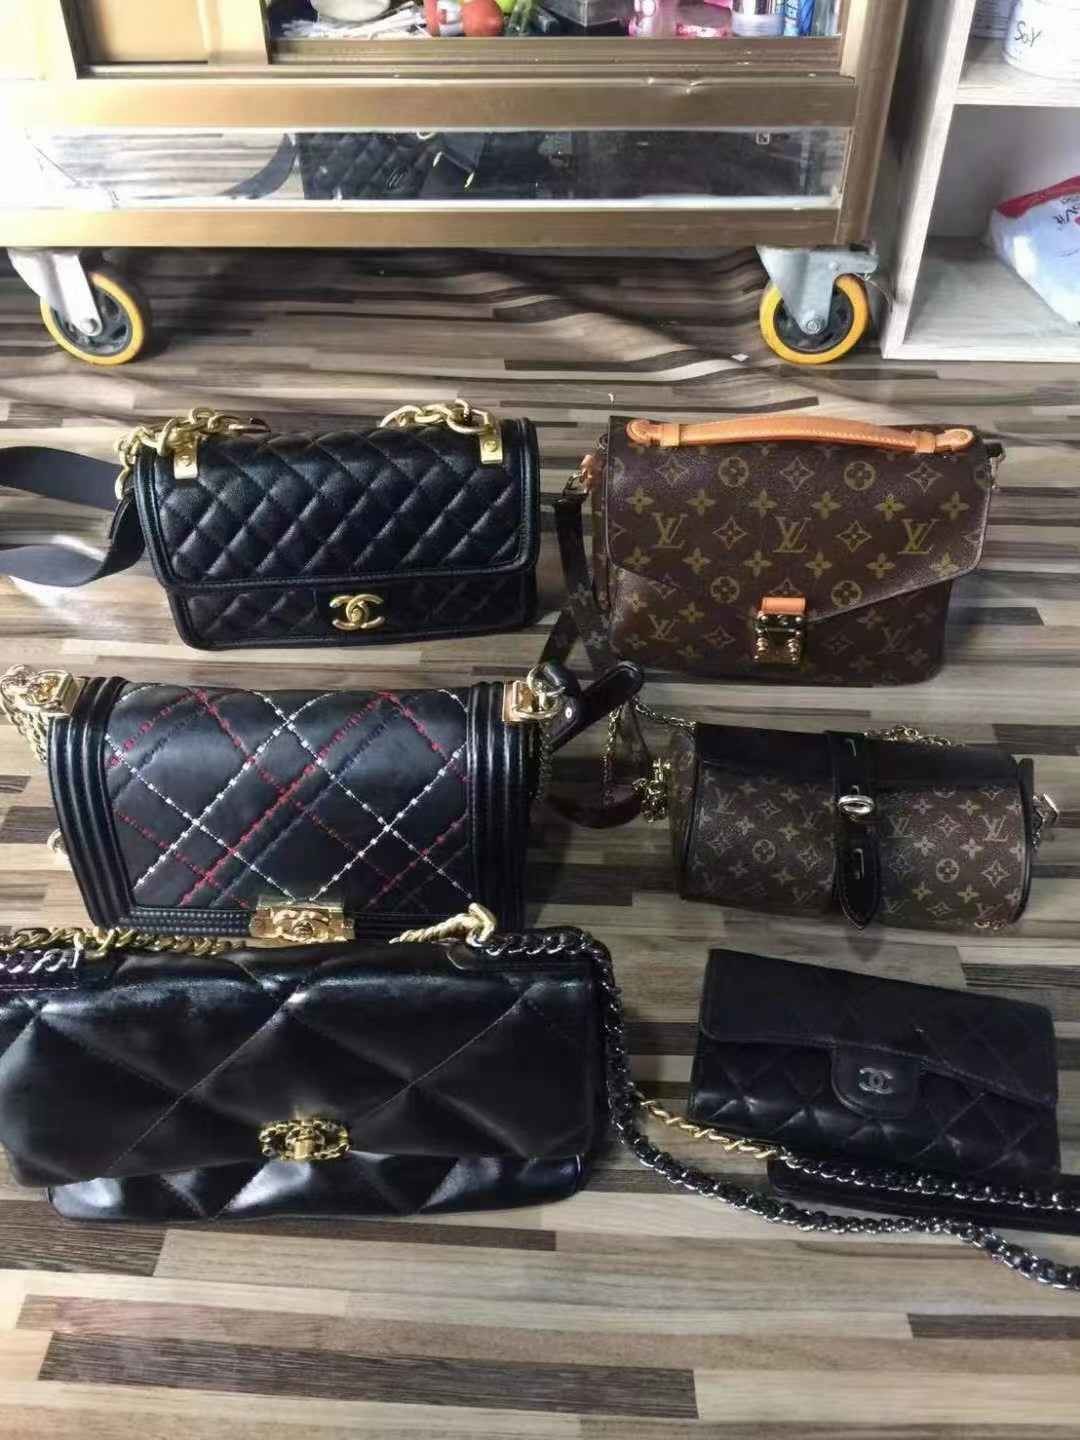 Quality 1 Kilogram Second Hand Luxury Bags Used Designer Handbags For Sale for sale